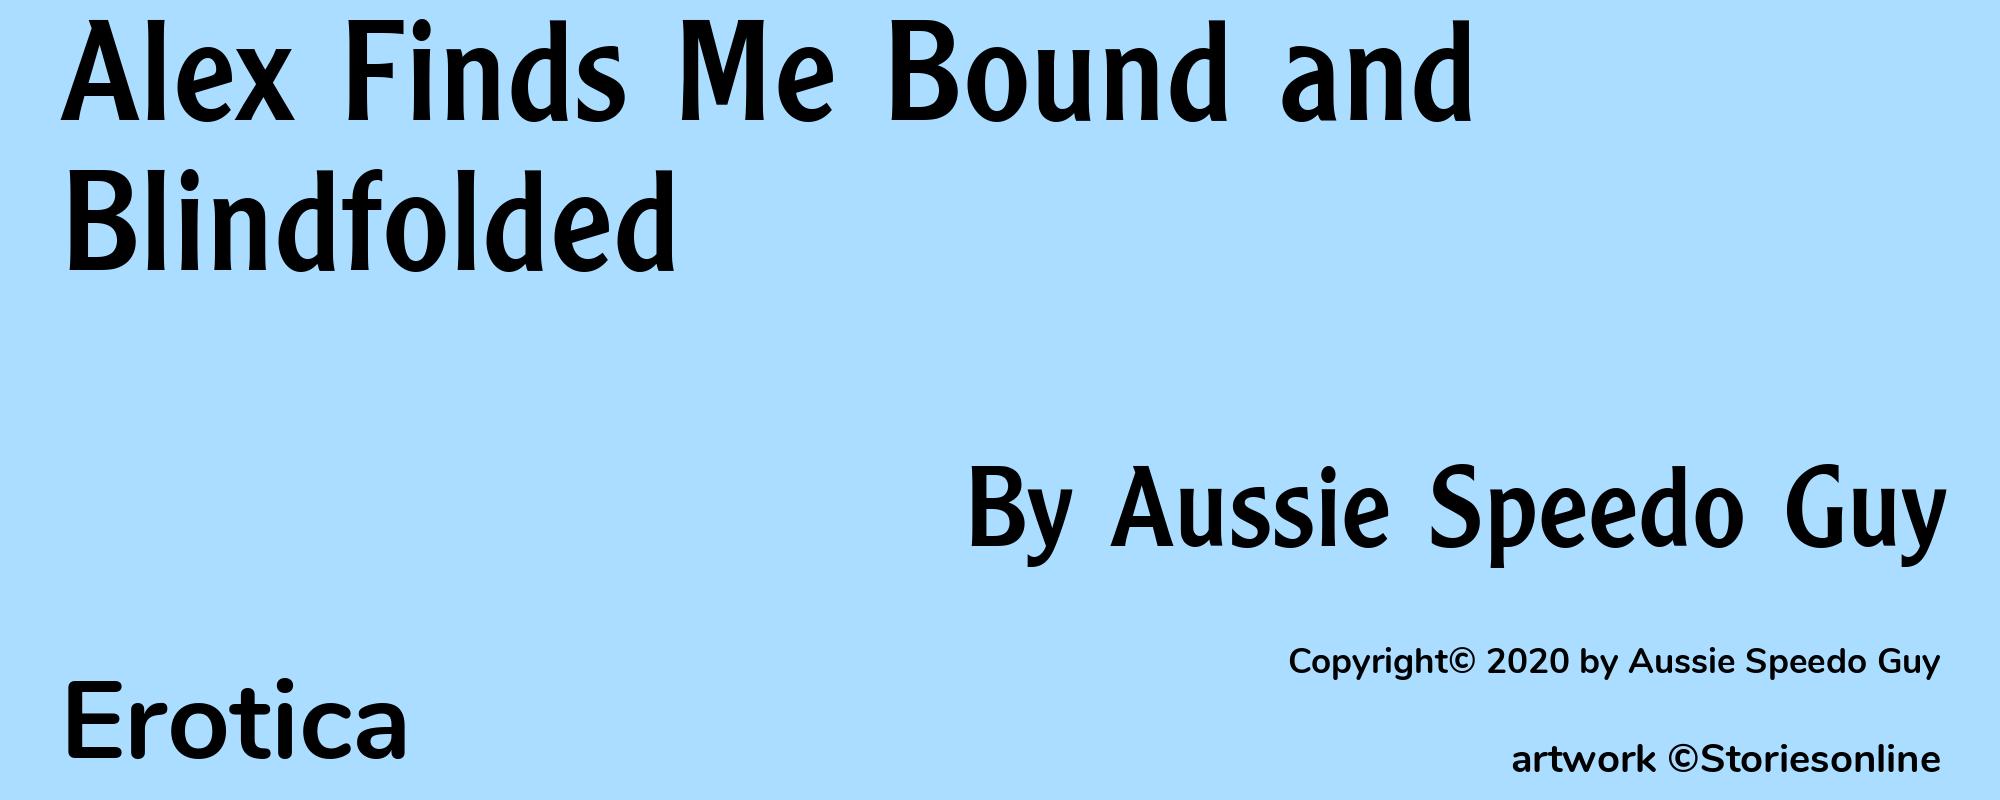 Alex Finds Me Bound and Blindfolded - Cover